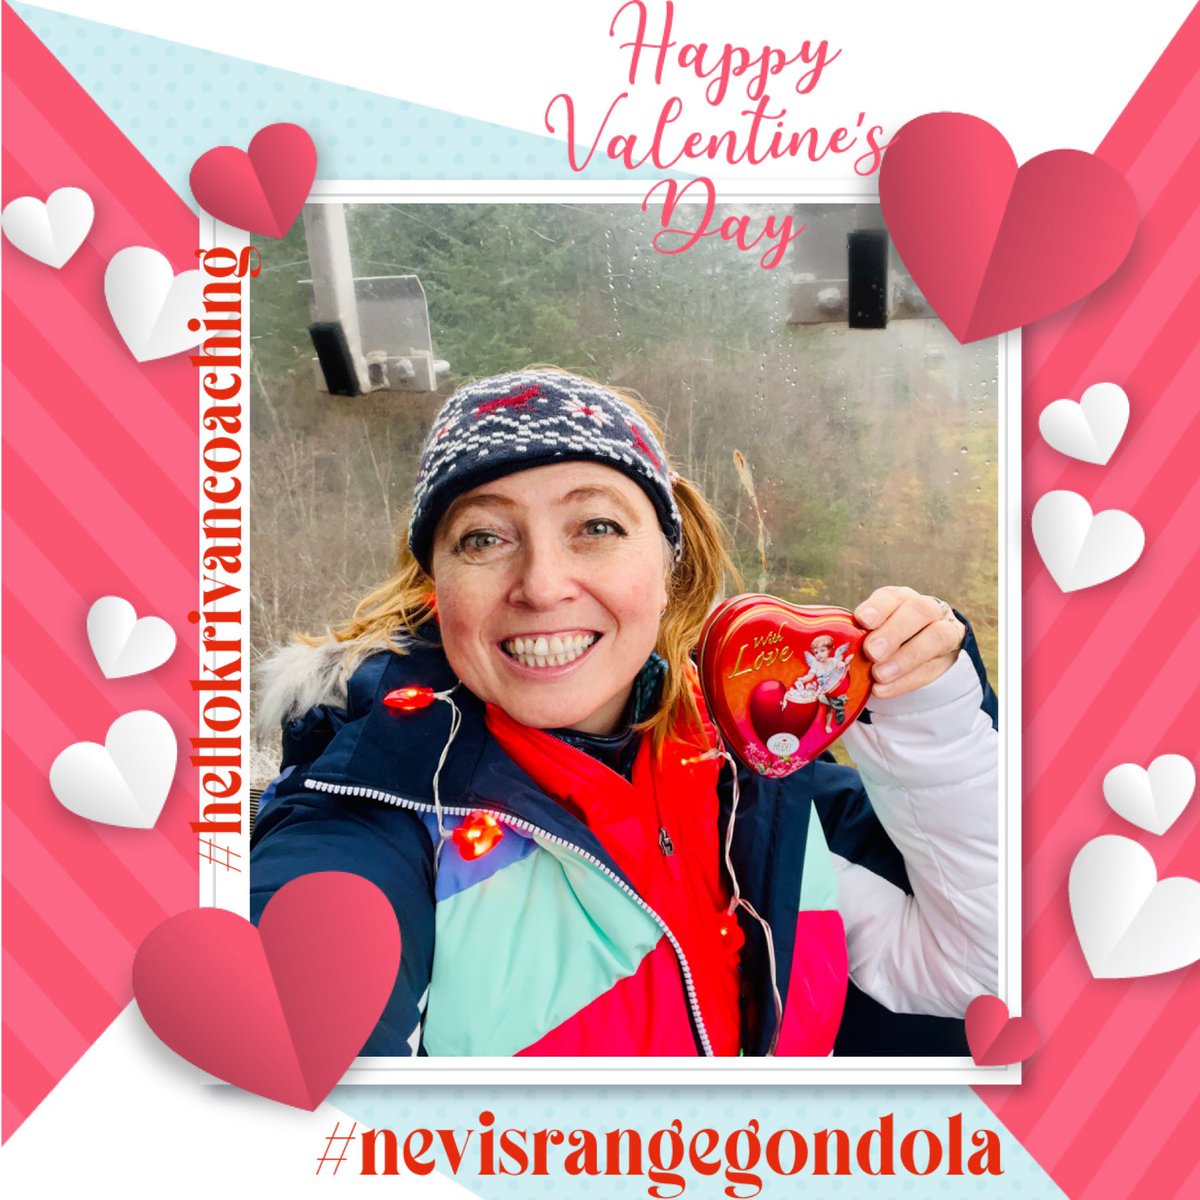 #ValentinesDay2023 ♥️ spent on moody mountains @TheNevisRange We’ve had many weather spells from sunshine to blistering winds to rain- #loveabdhate & enjoyed every bit of it! #slovakinscotland #forbetterorworse #hifromhighlands #hellokrivan #lifeandlosscoaching #familymediation